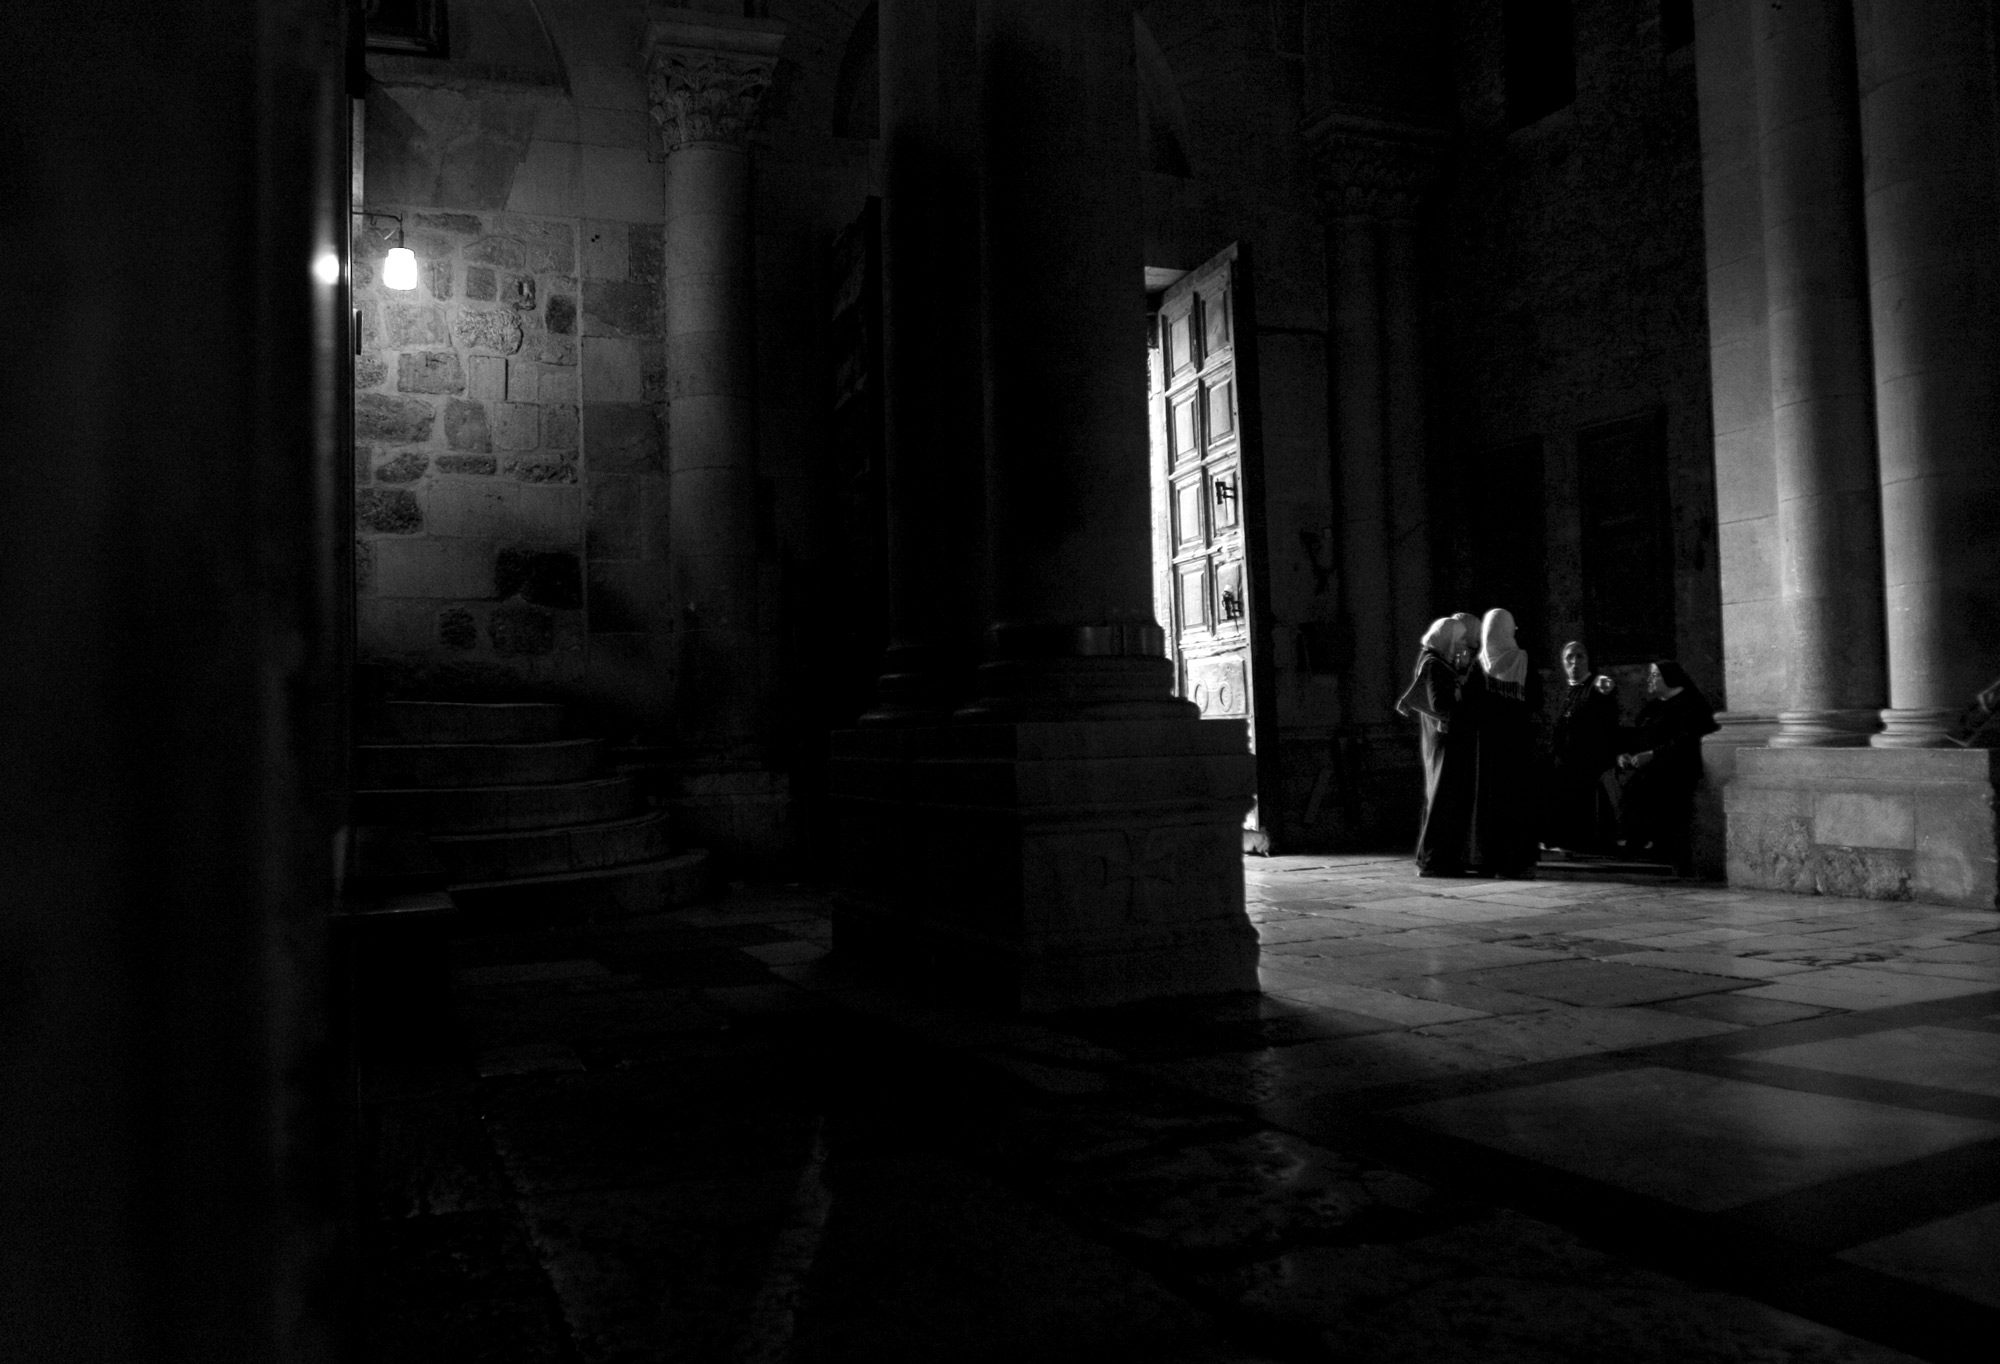 At the entrance to the Church of the Holy Sepulchre.